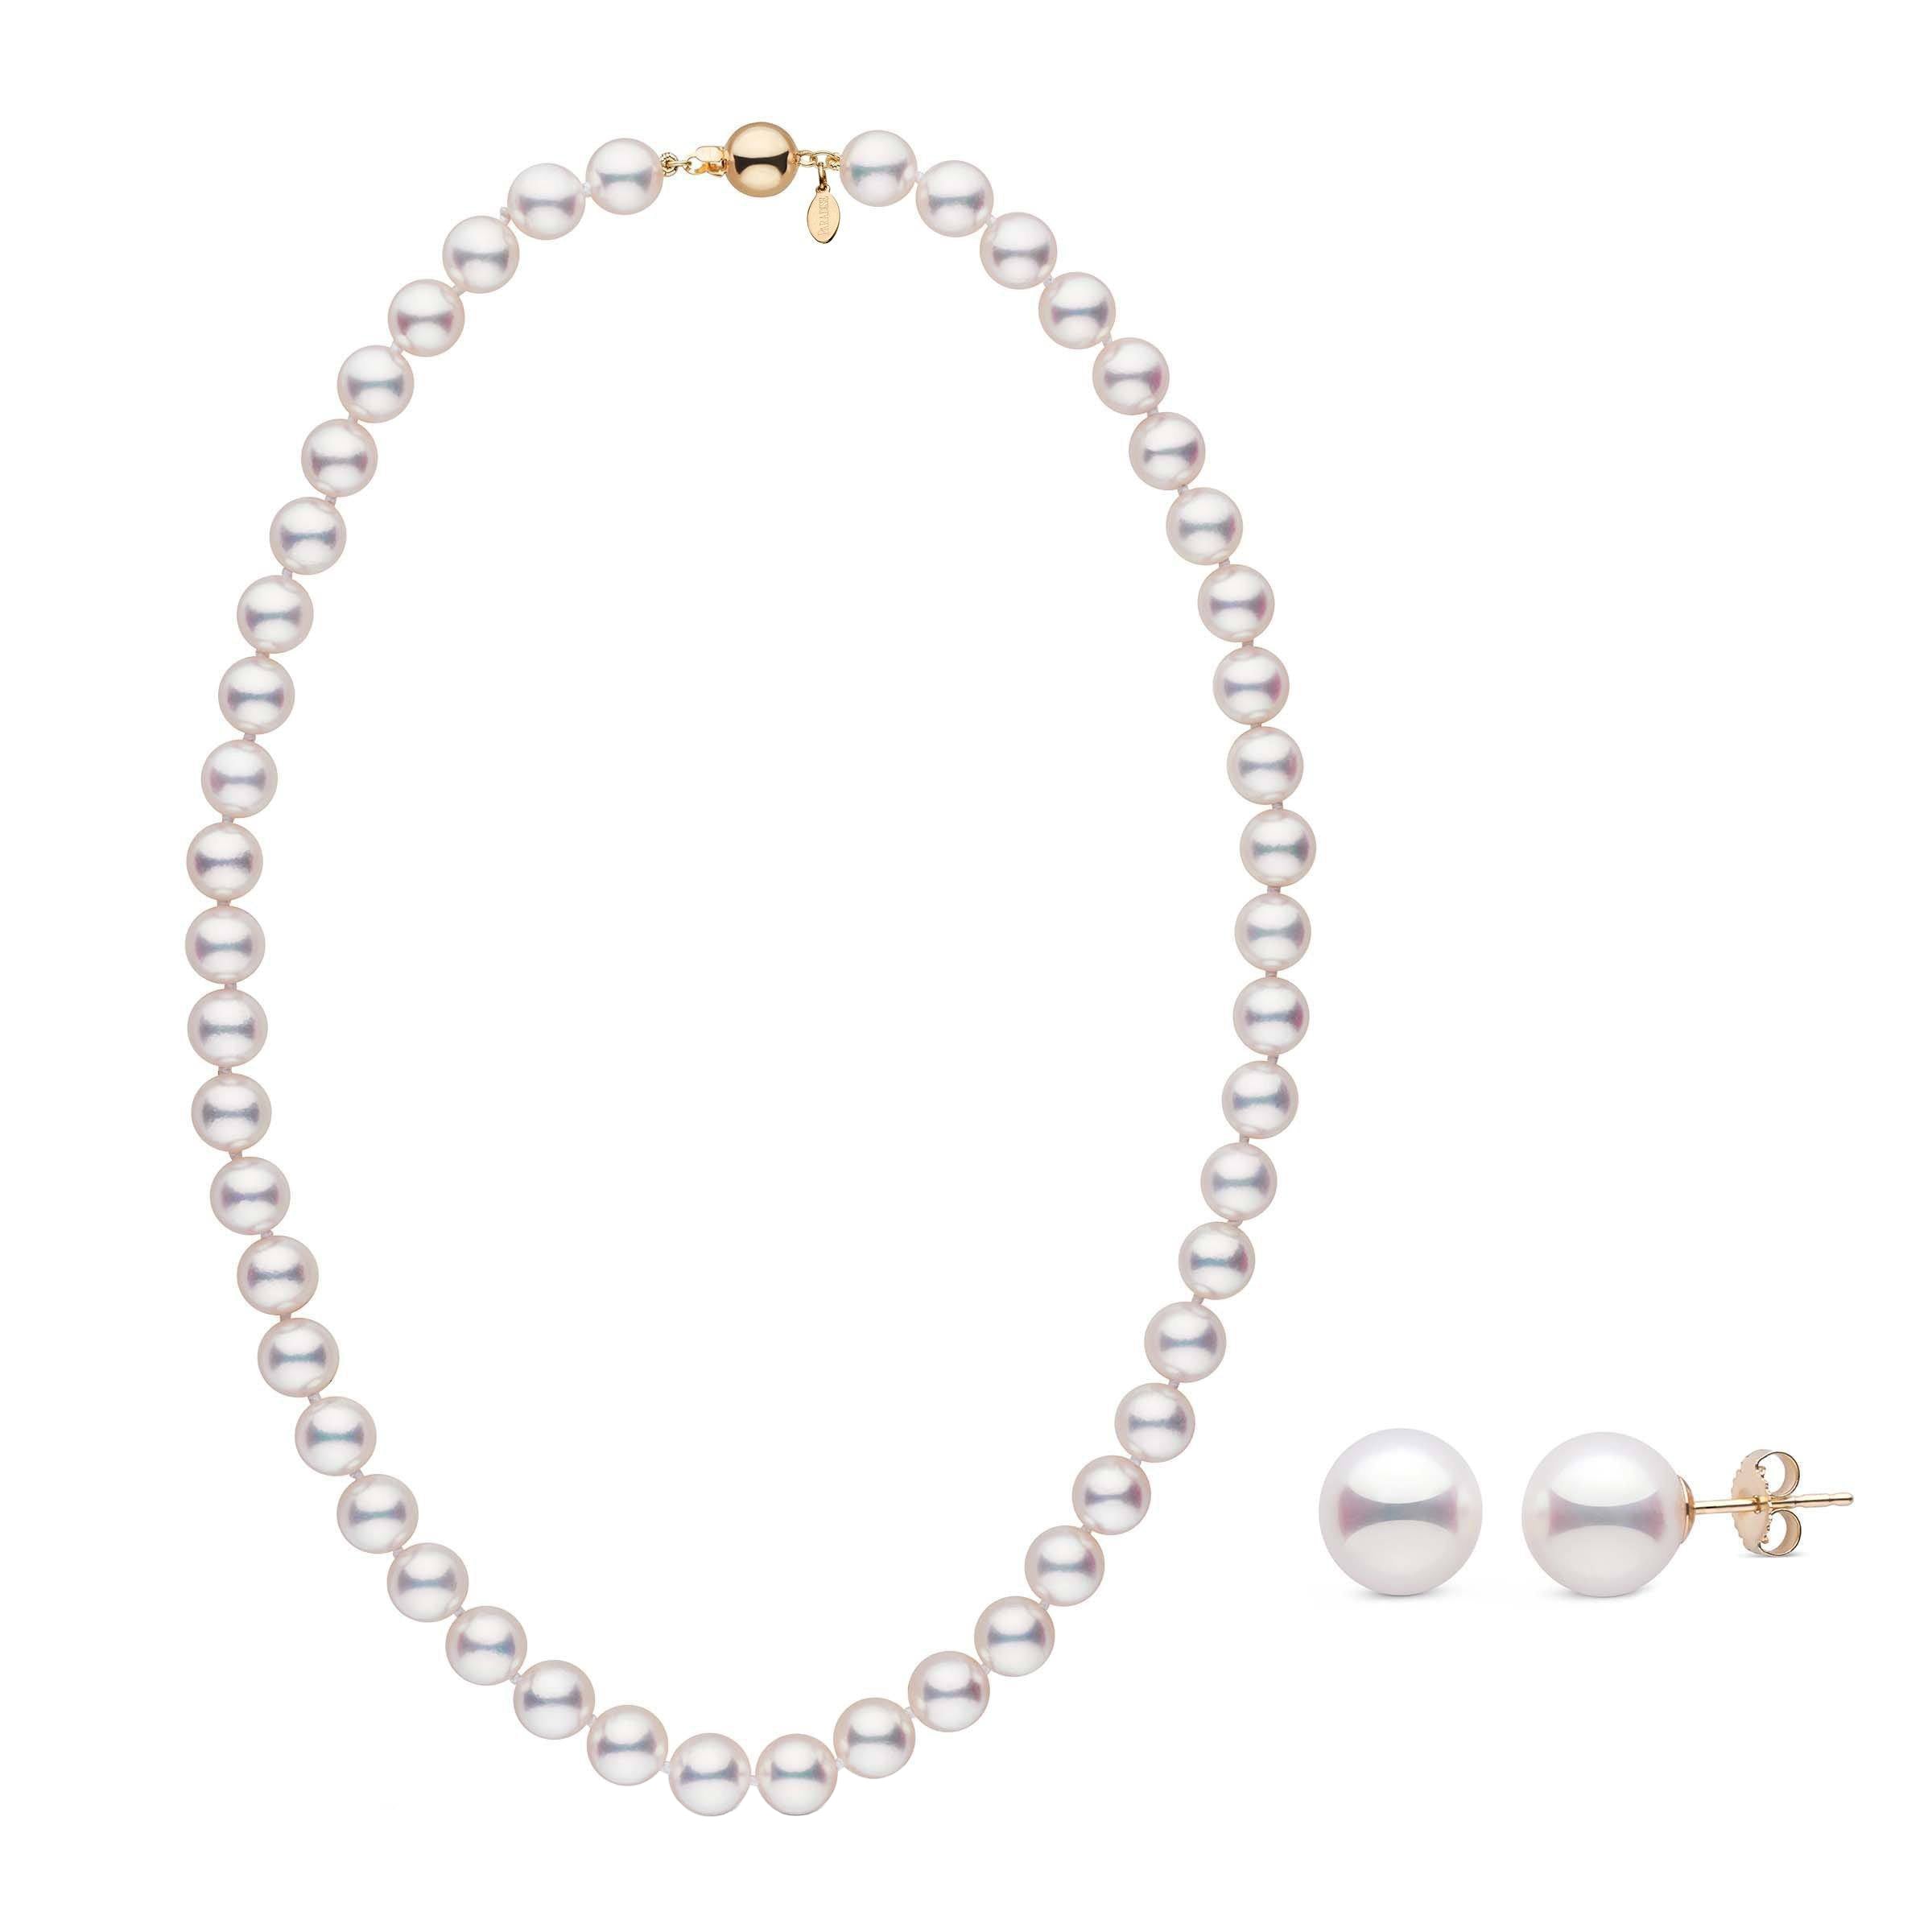 8.5-9.0 mm White Hanadama Akoya Pearl Set necklace and earrings yellow gold